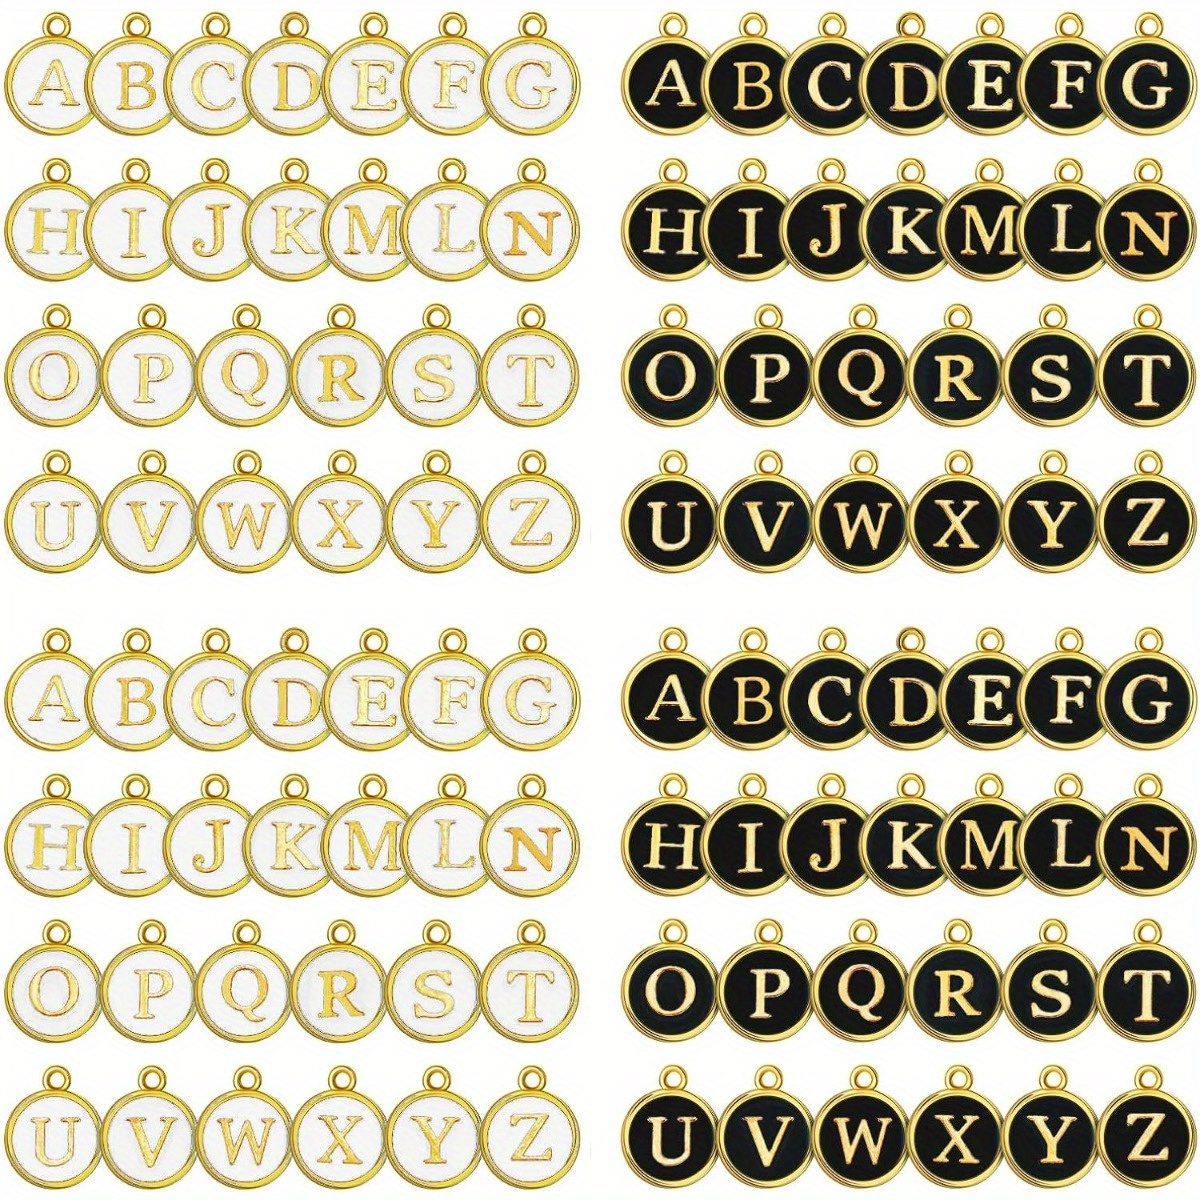 8 Colors Letter Charms, A-z Alphabet Charms Double-sided Enamel